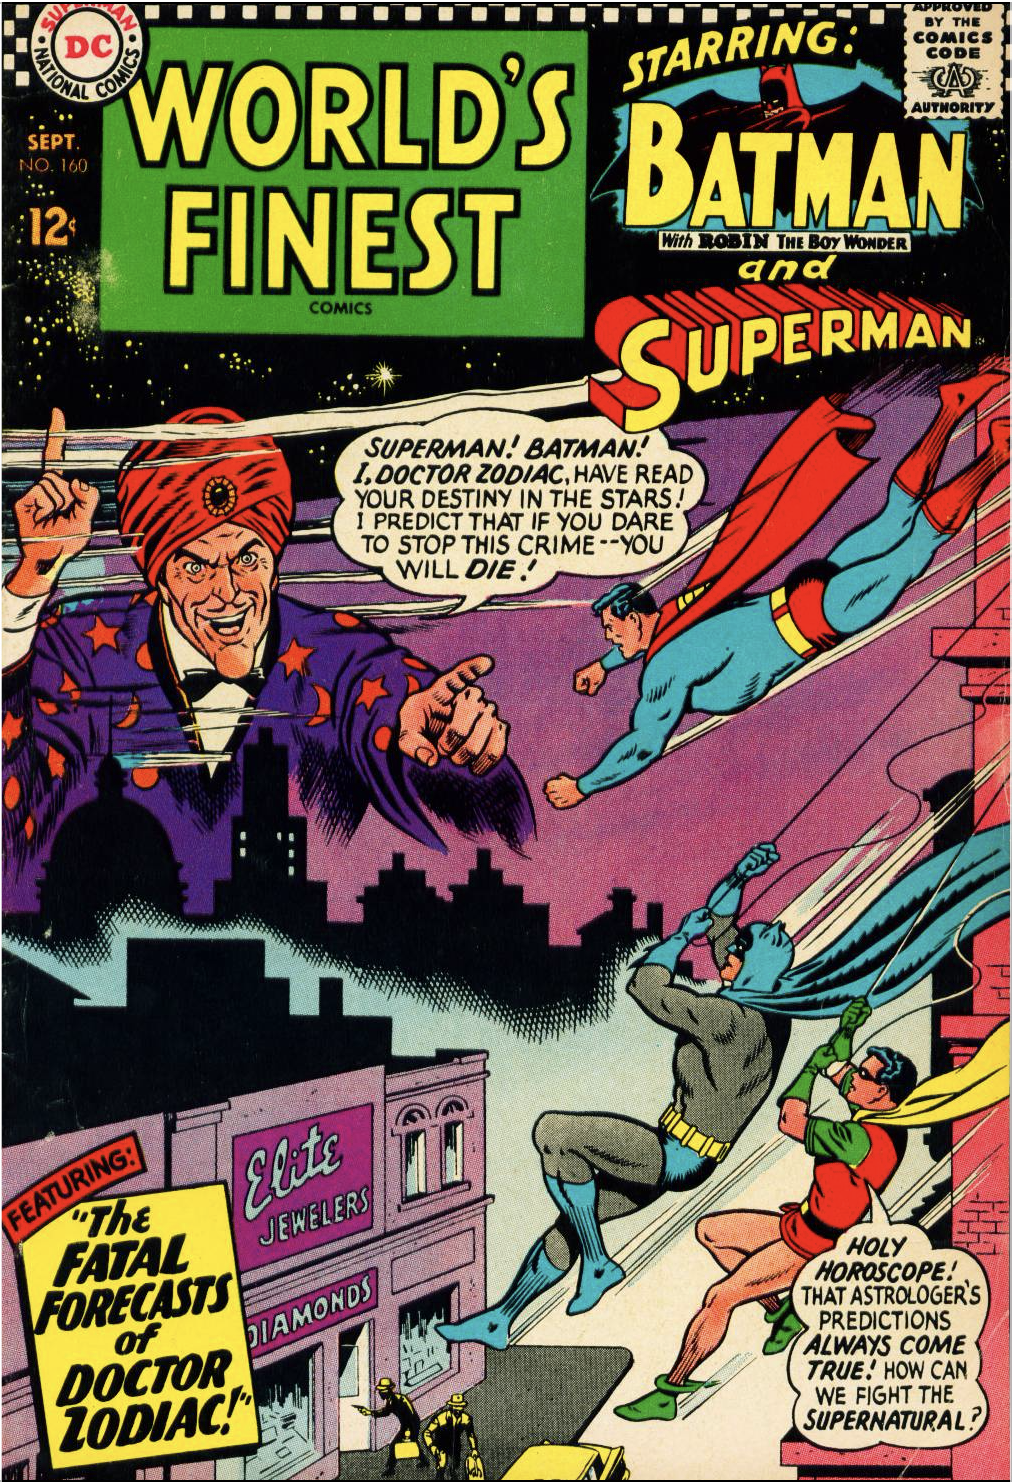 Is Your Capricorn Rising or Are You Just Happy To See Me? (World's Finest #160)